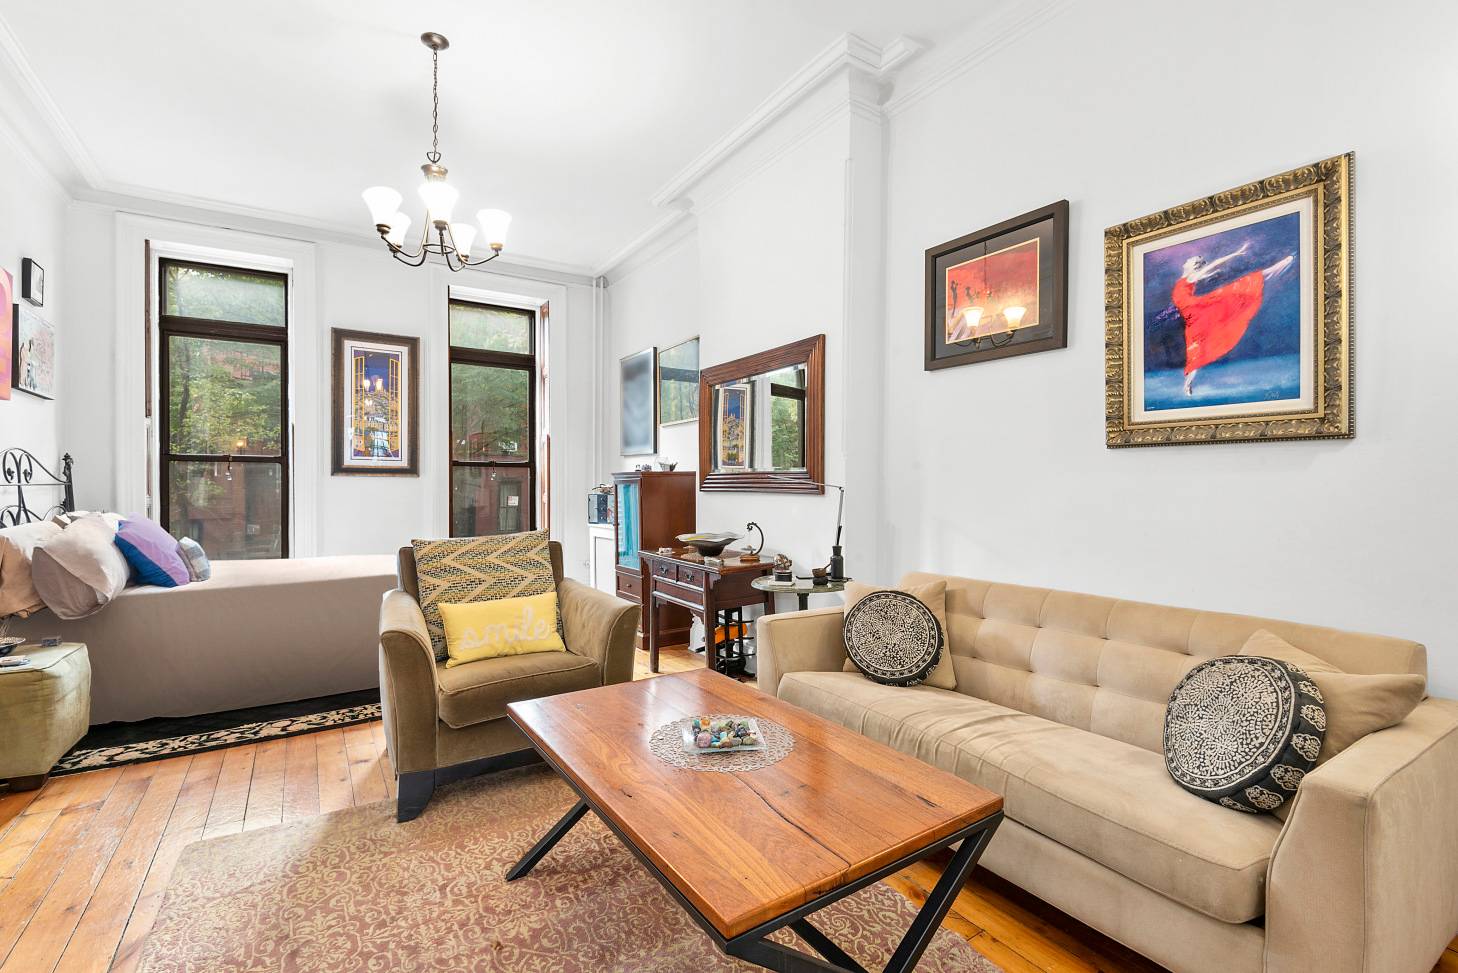 A Family Classic. This well loved legal 3 family brownstone home served a multi generational family for many years.